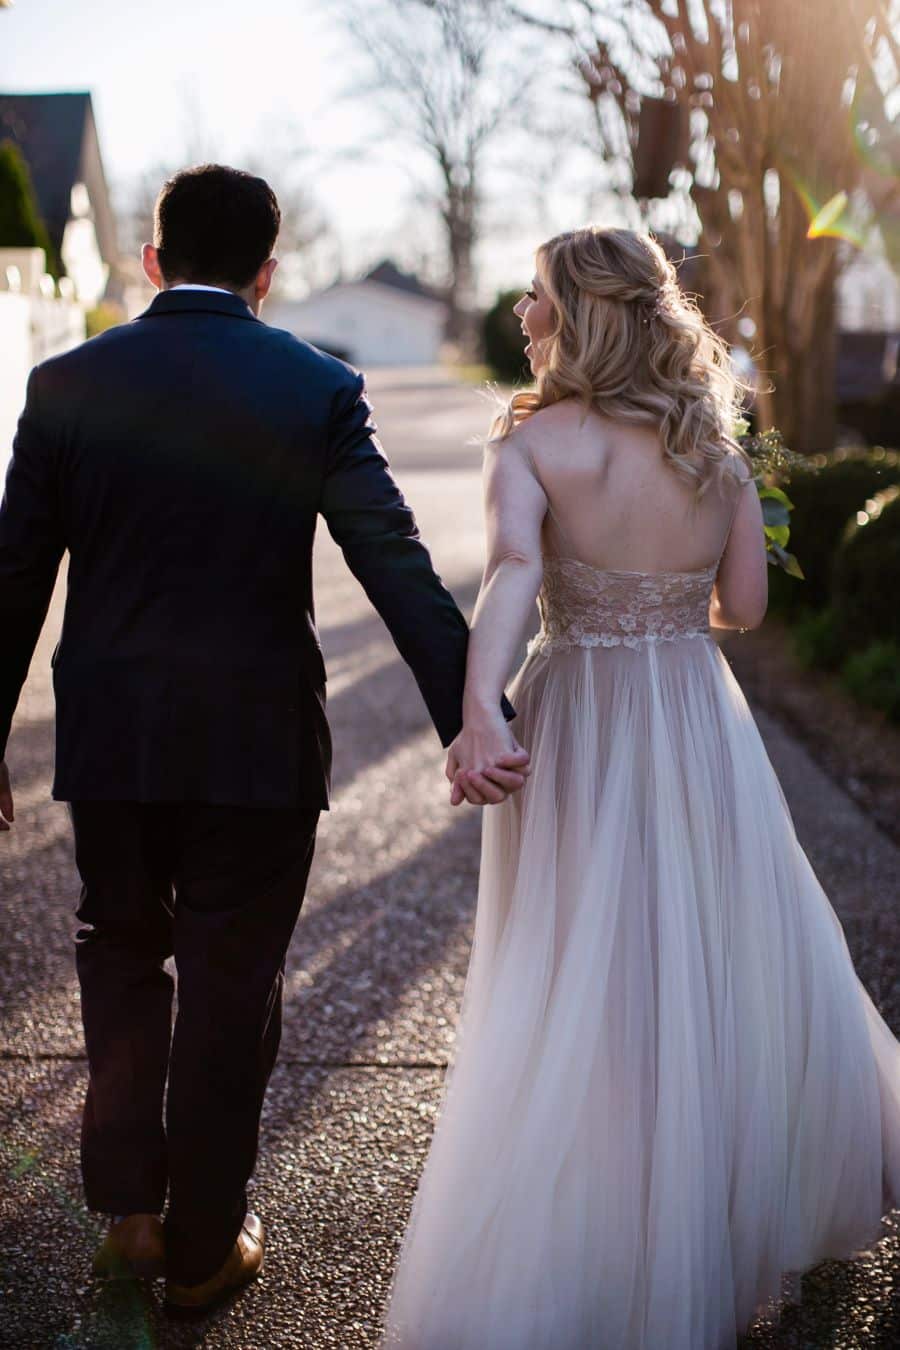 Bride and groom laughing and walking away while holding hands / Elopement / Spring / March / Dusty Rose